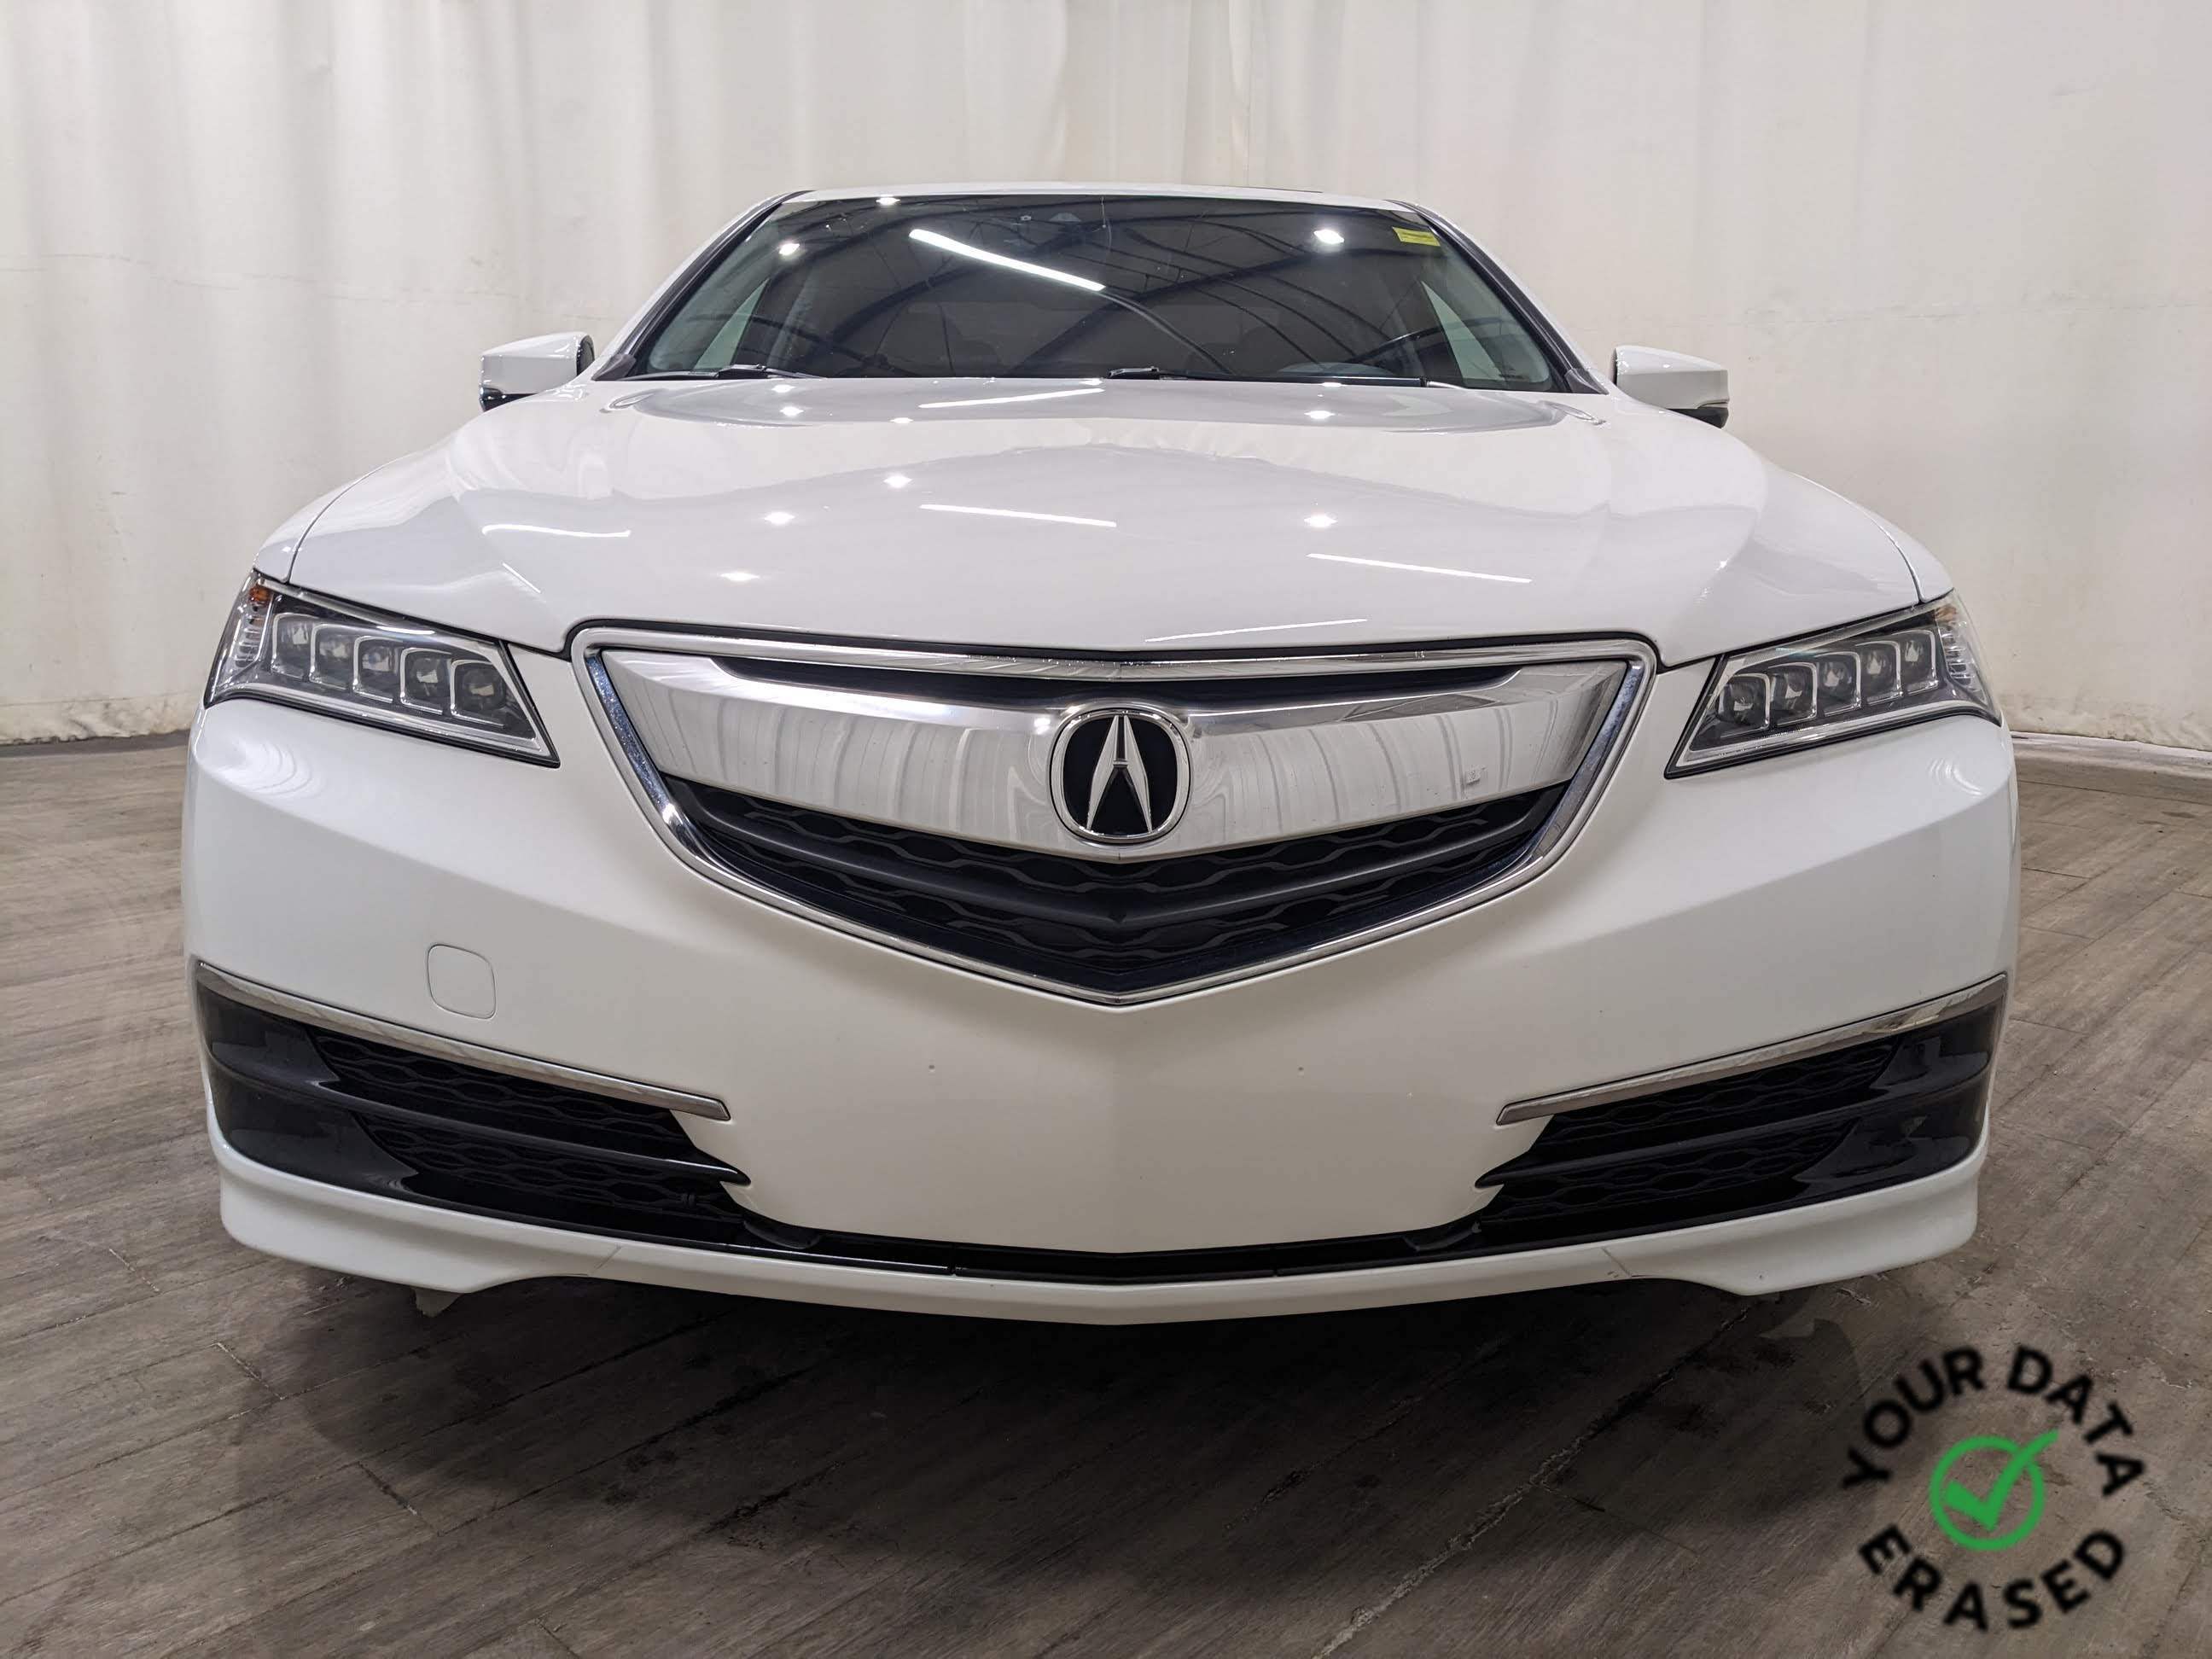 2017 Acura TLX SH-AWD V6 Tech | No Accidents | Remote Start